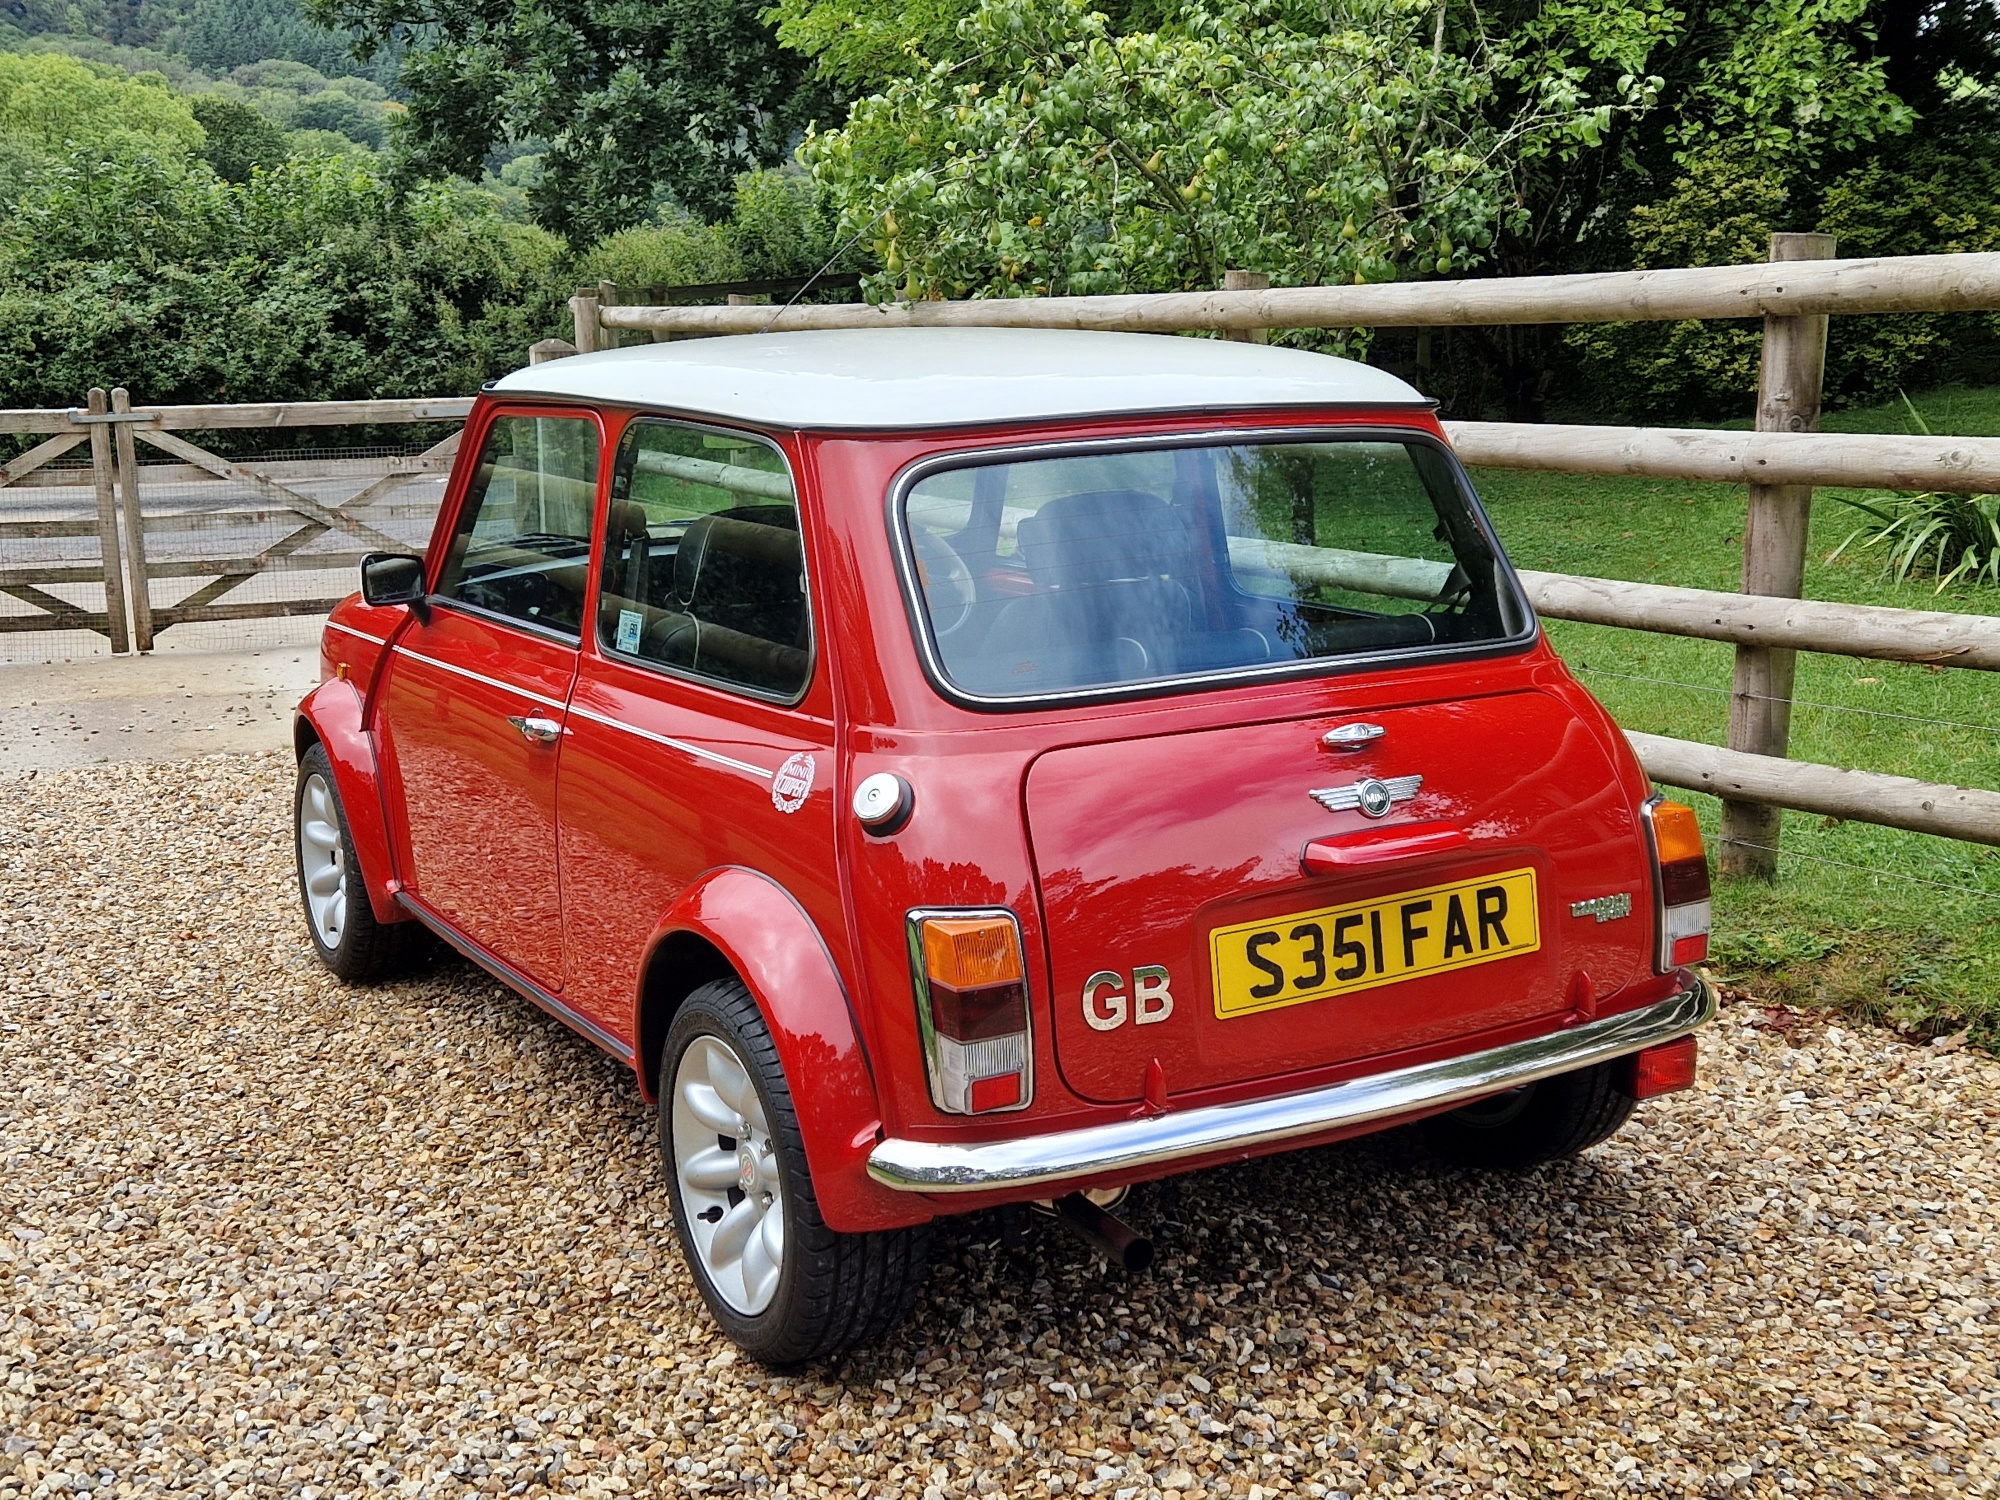 ** NOW SOLD ** 1998 Rover Mini Cooper Sport On Just 15250 Miles From New!!